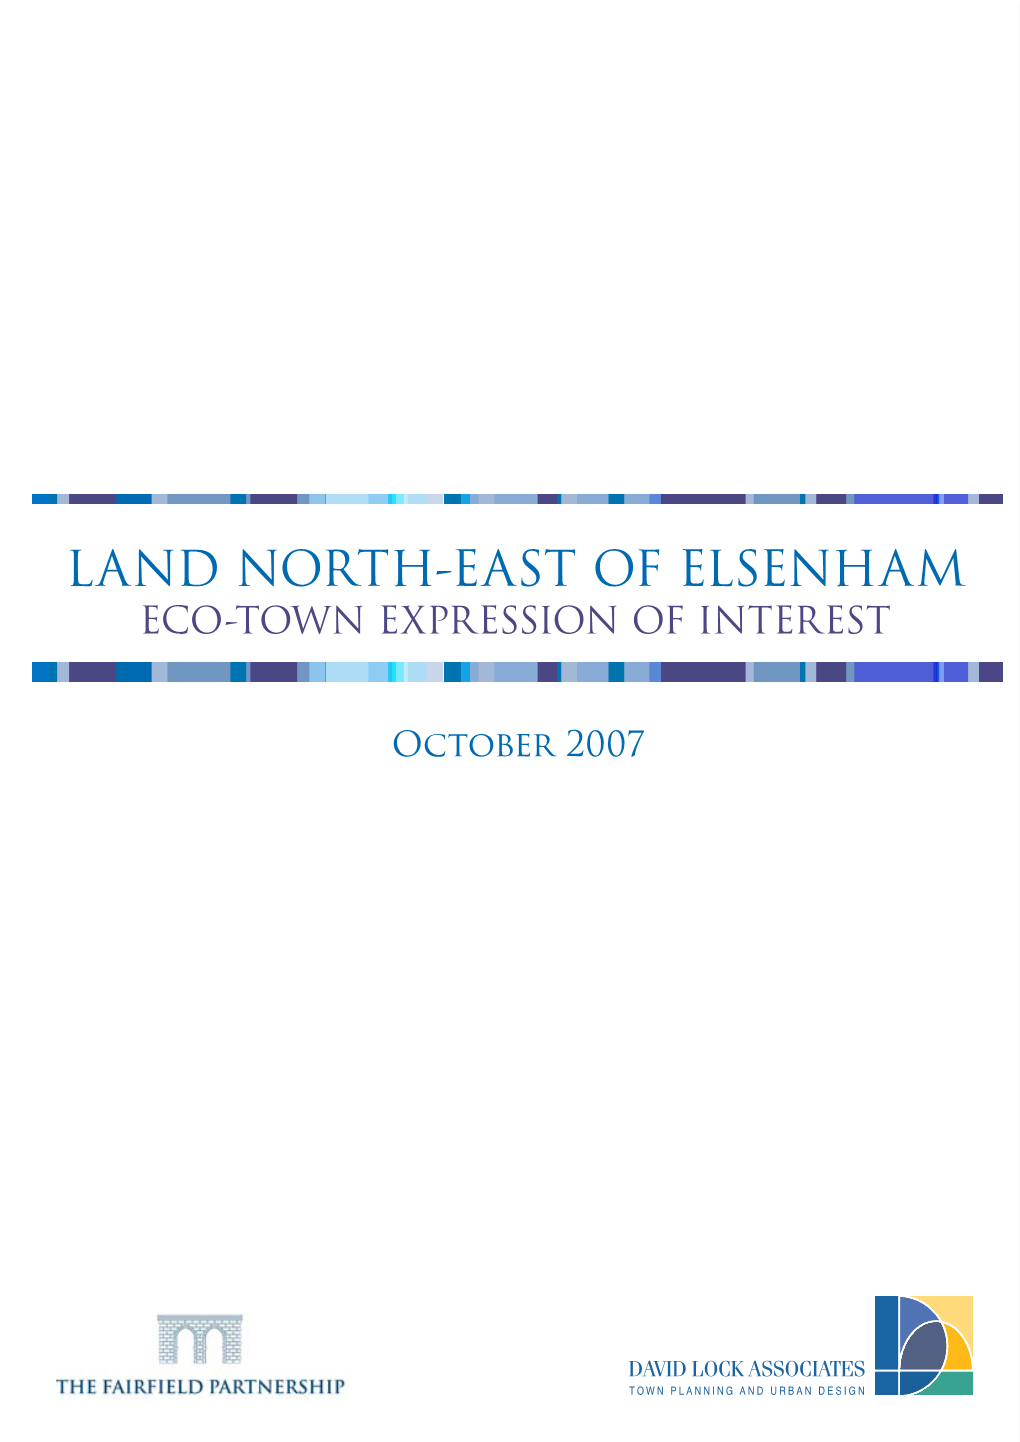 Land North-East of Elsenham Eco-Town Expression of Interest